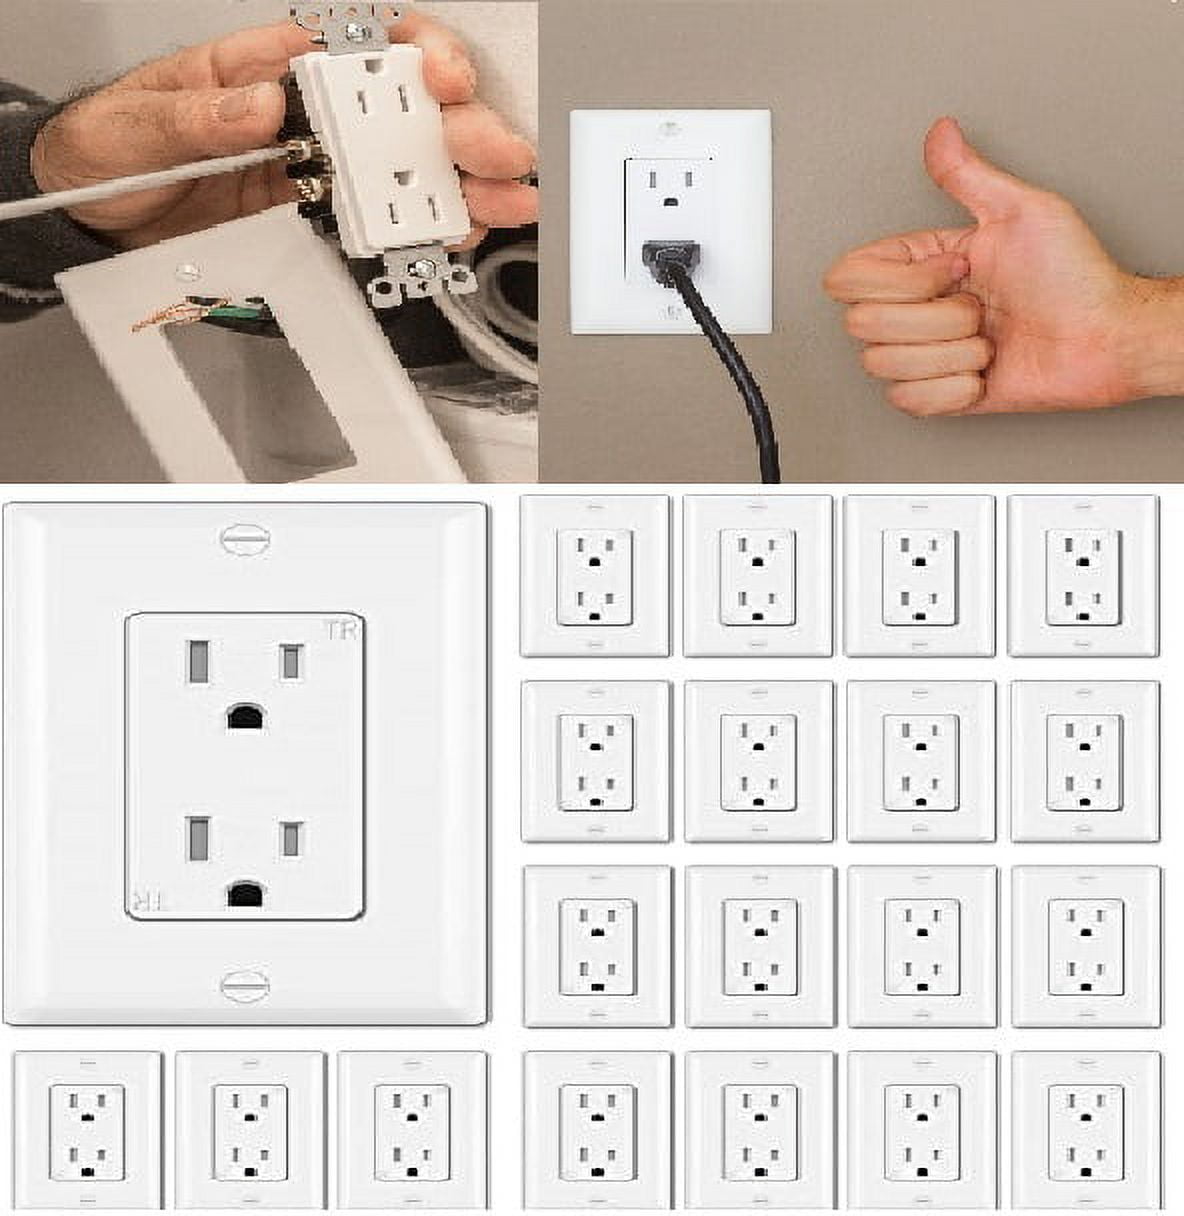 15 Amp Decorator Wall Outlet, 15A/125V, UL Listed, Tamper Resistant, 2 Pole  3 Wire,3 Prong Socket, Easy Install, Electrical Outlets, White 20 Packs